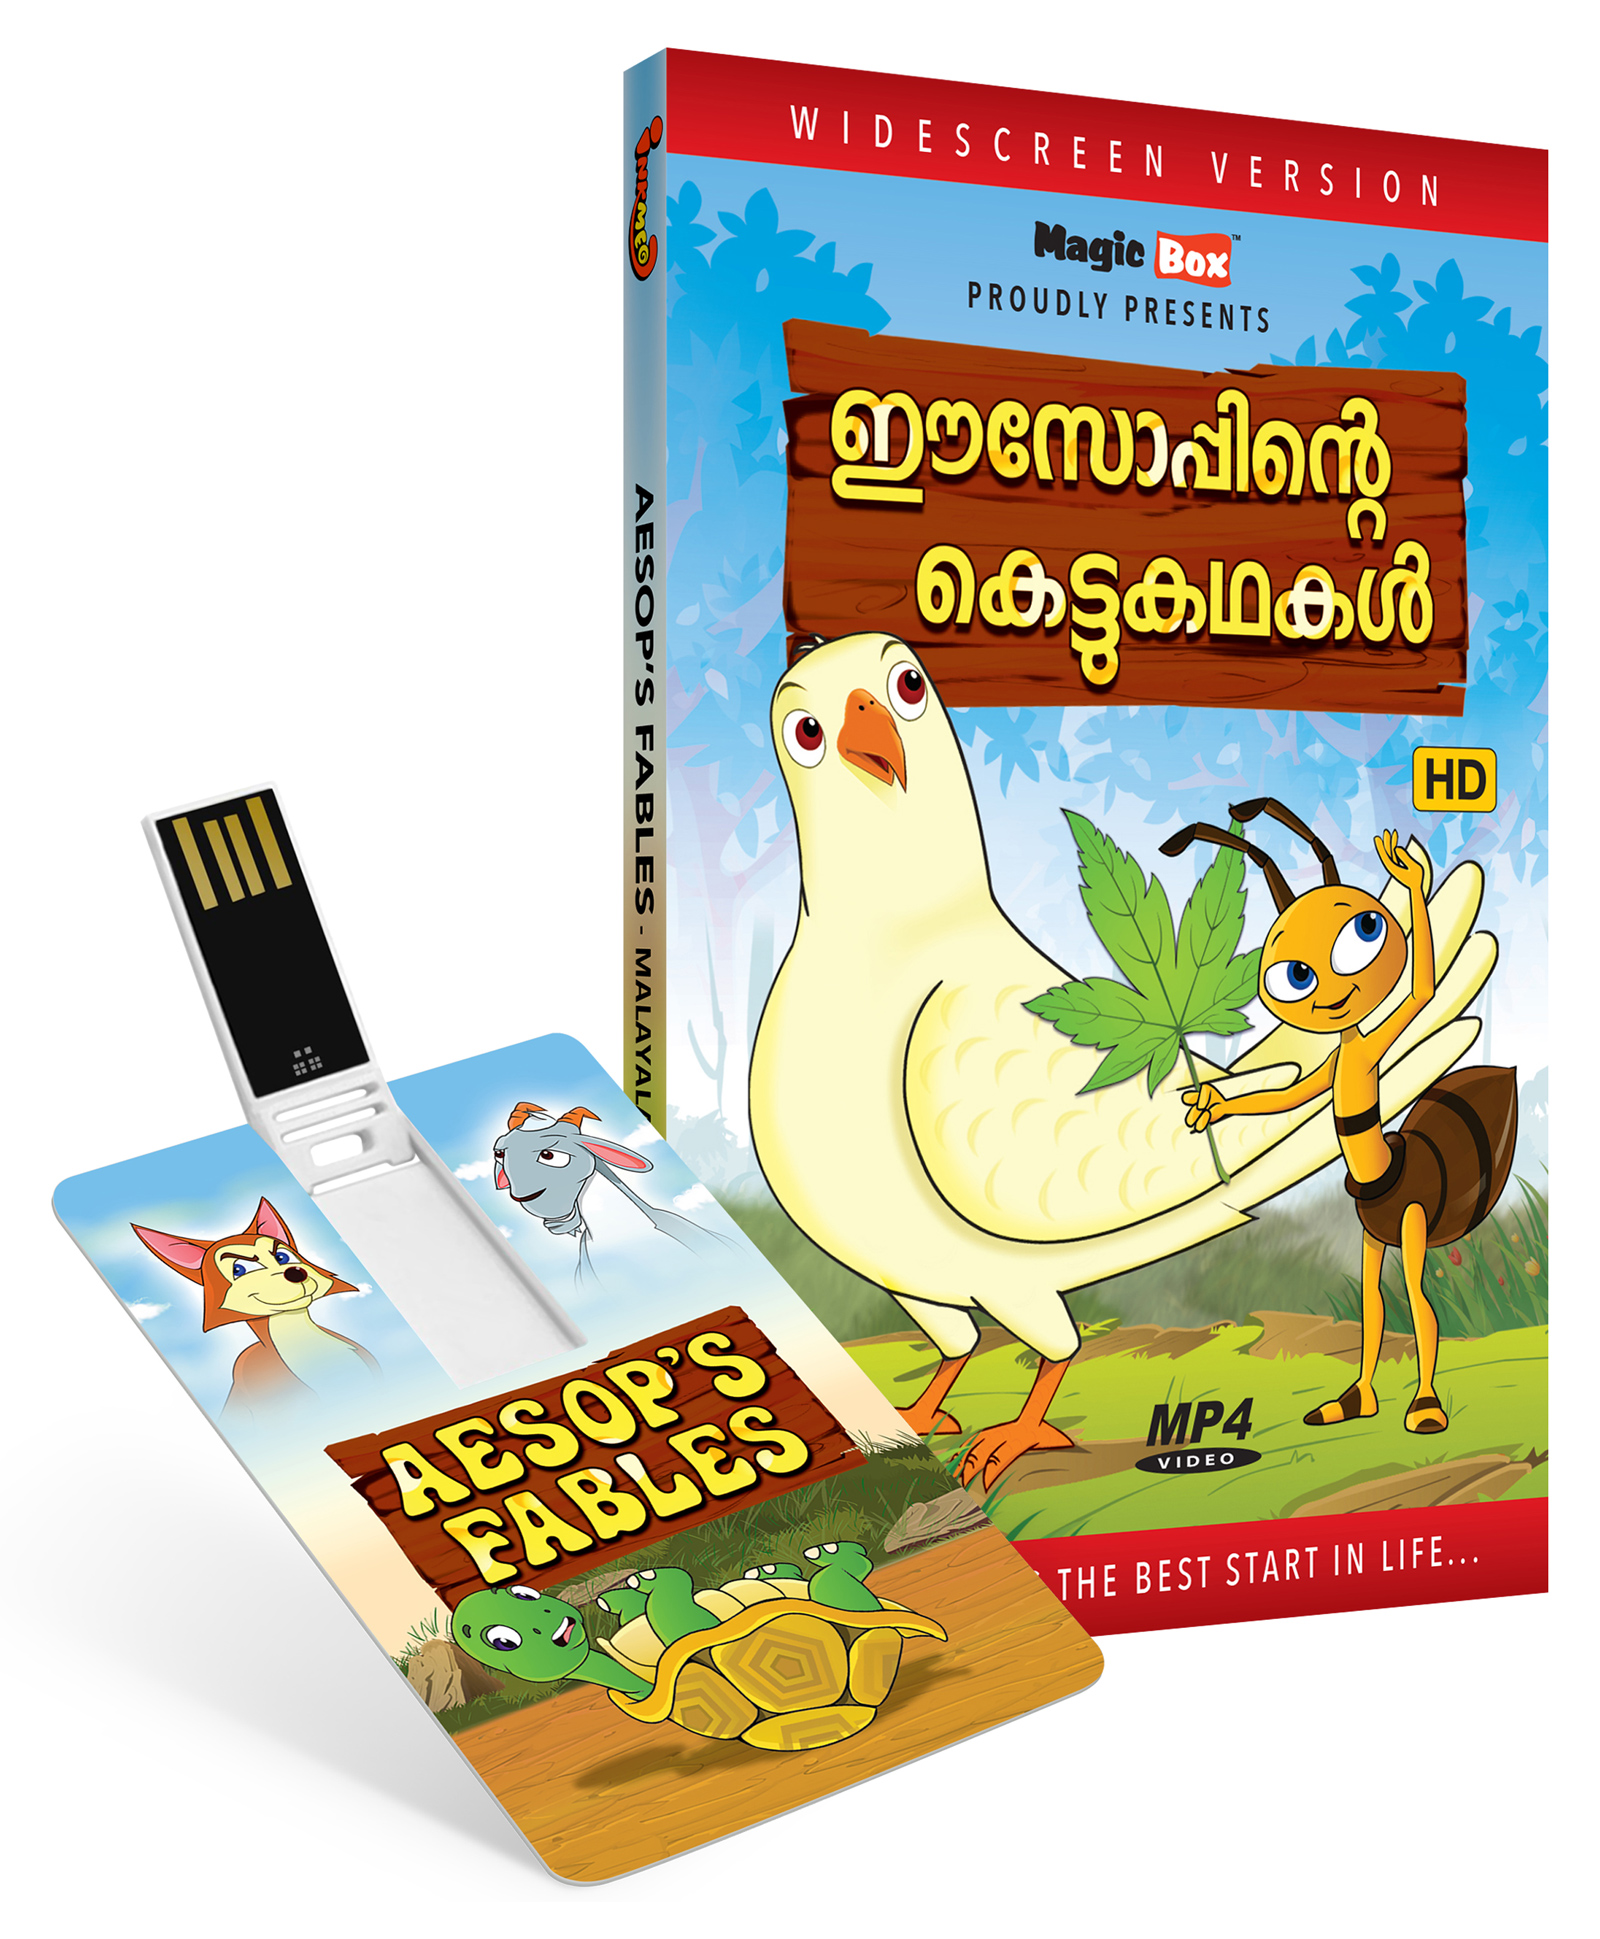 Inkmeo USB Video Pendrive Aesop's Fables Animated Story - Malayalam Online  in India, Buy at Best Price from  - 8476752